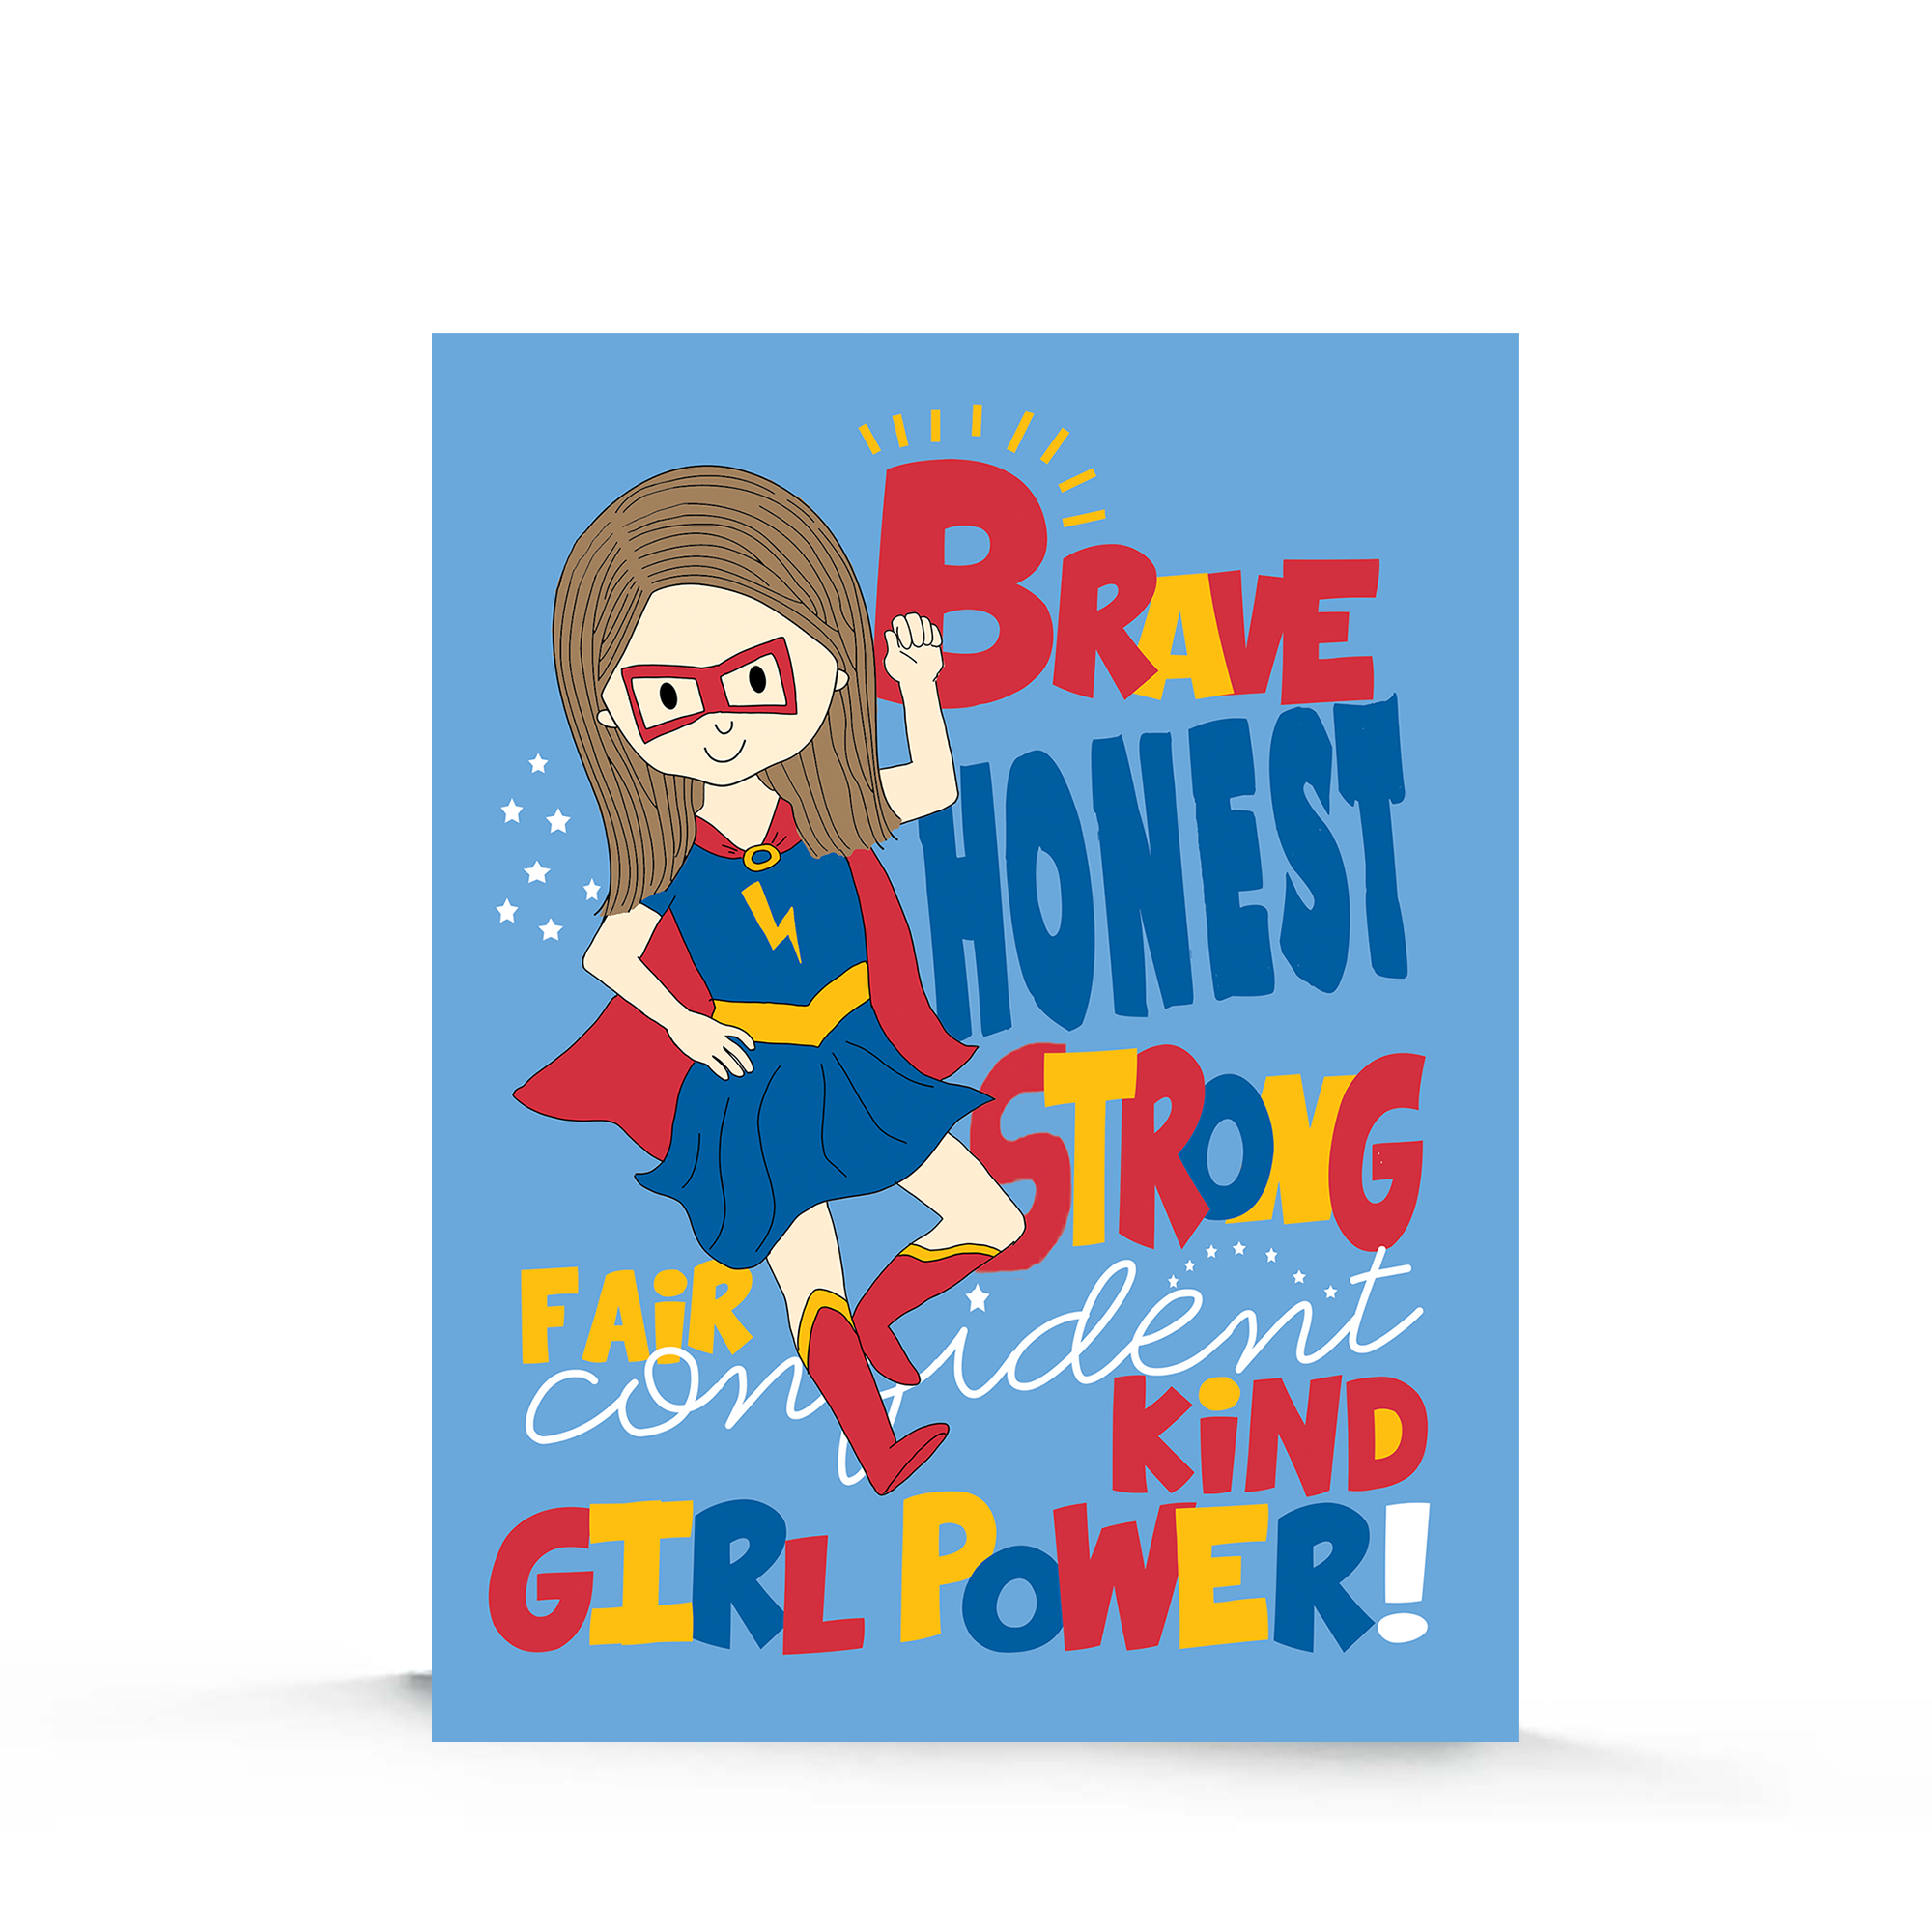 This Girl Power Birthday Card is made with love by Stacey M Design! Shop more unique gift ideas today with Spots Initiatives, the best way to support creators.